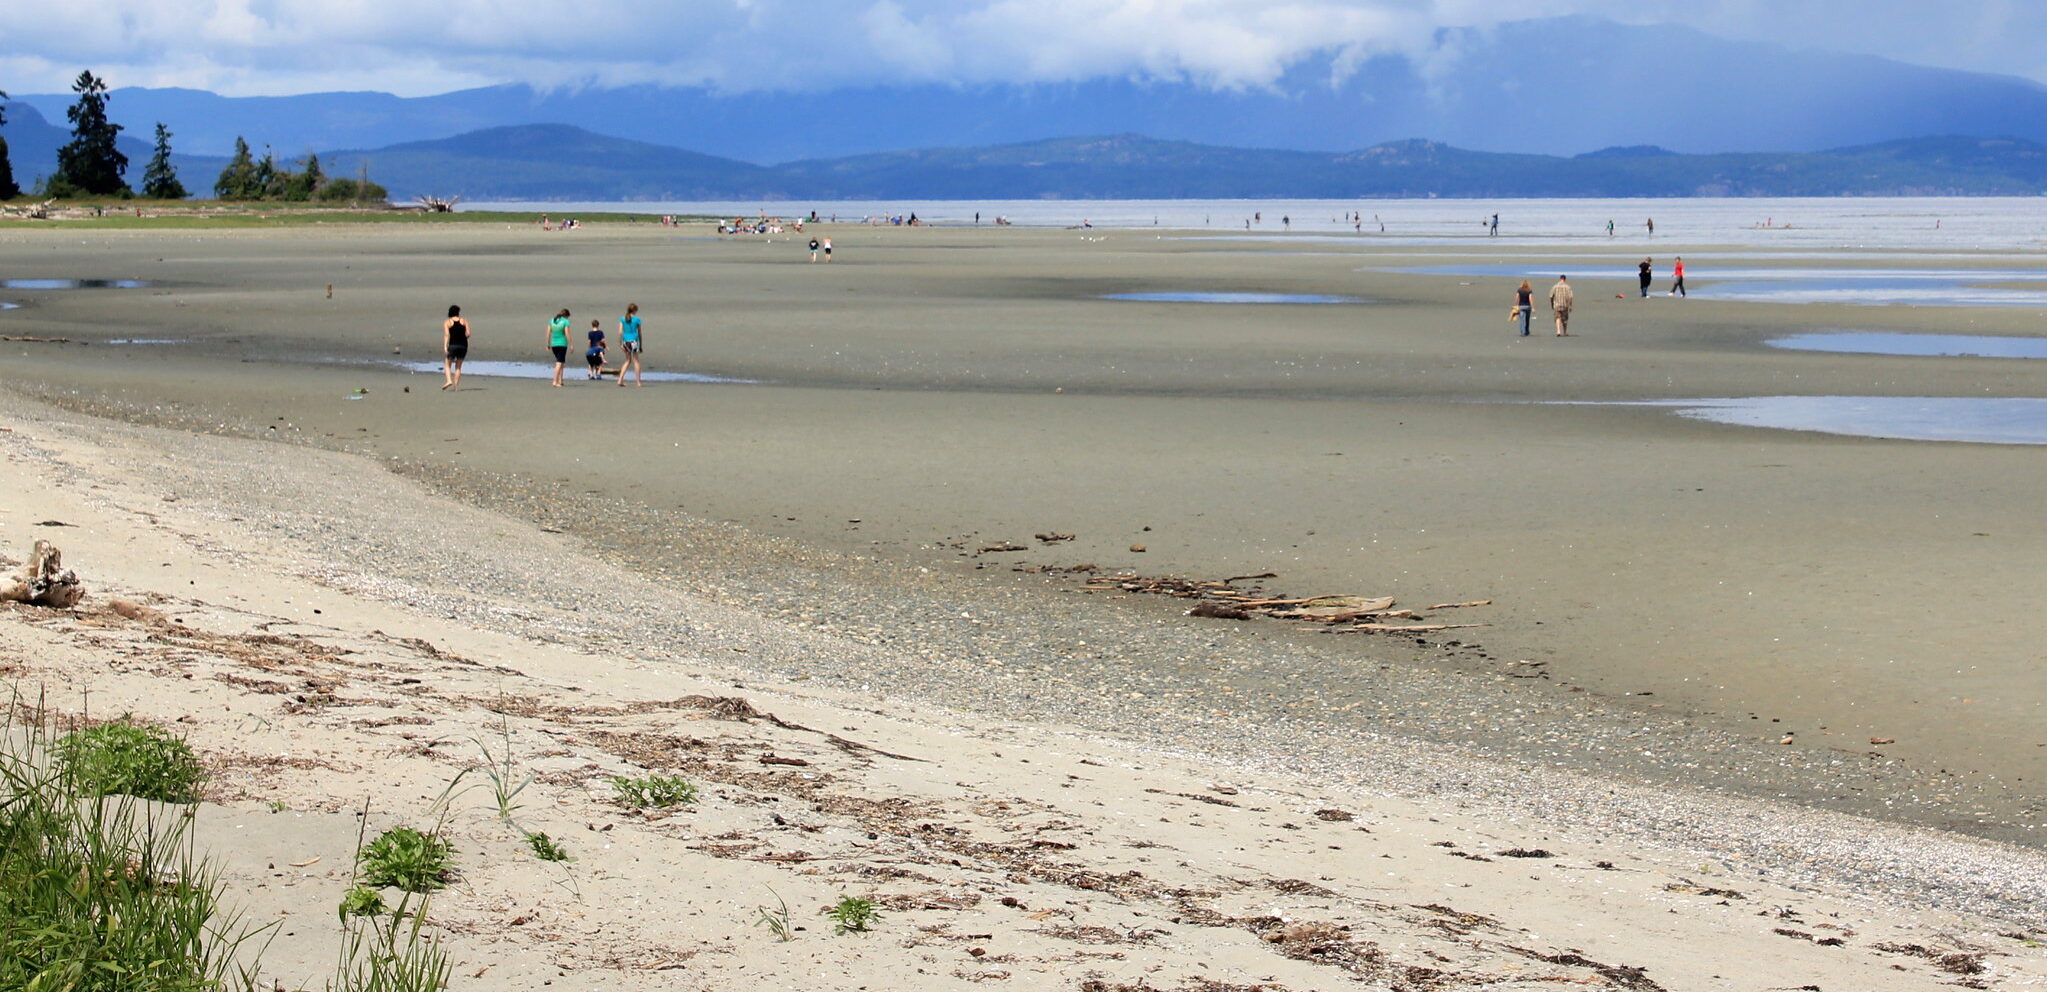 People enjoying the beach at low tide, Parksville BC